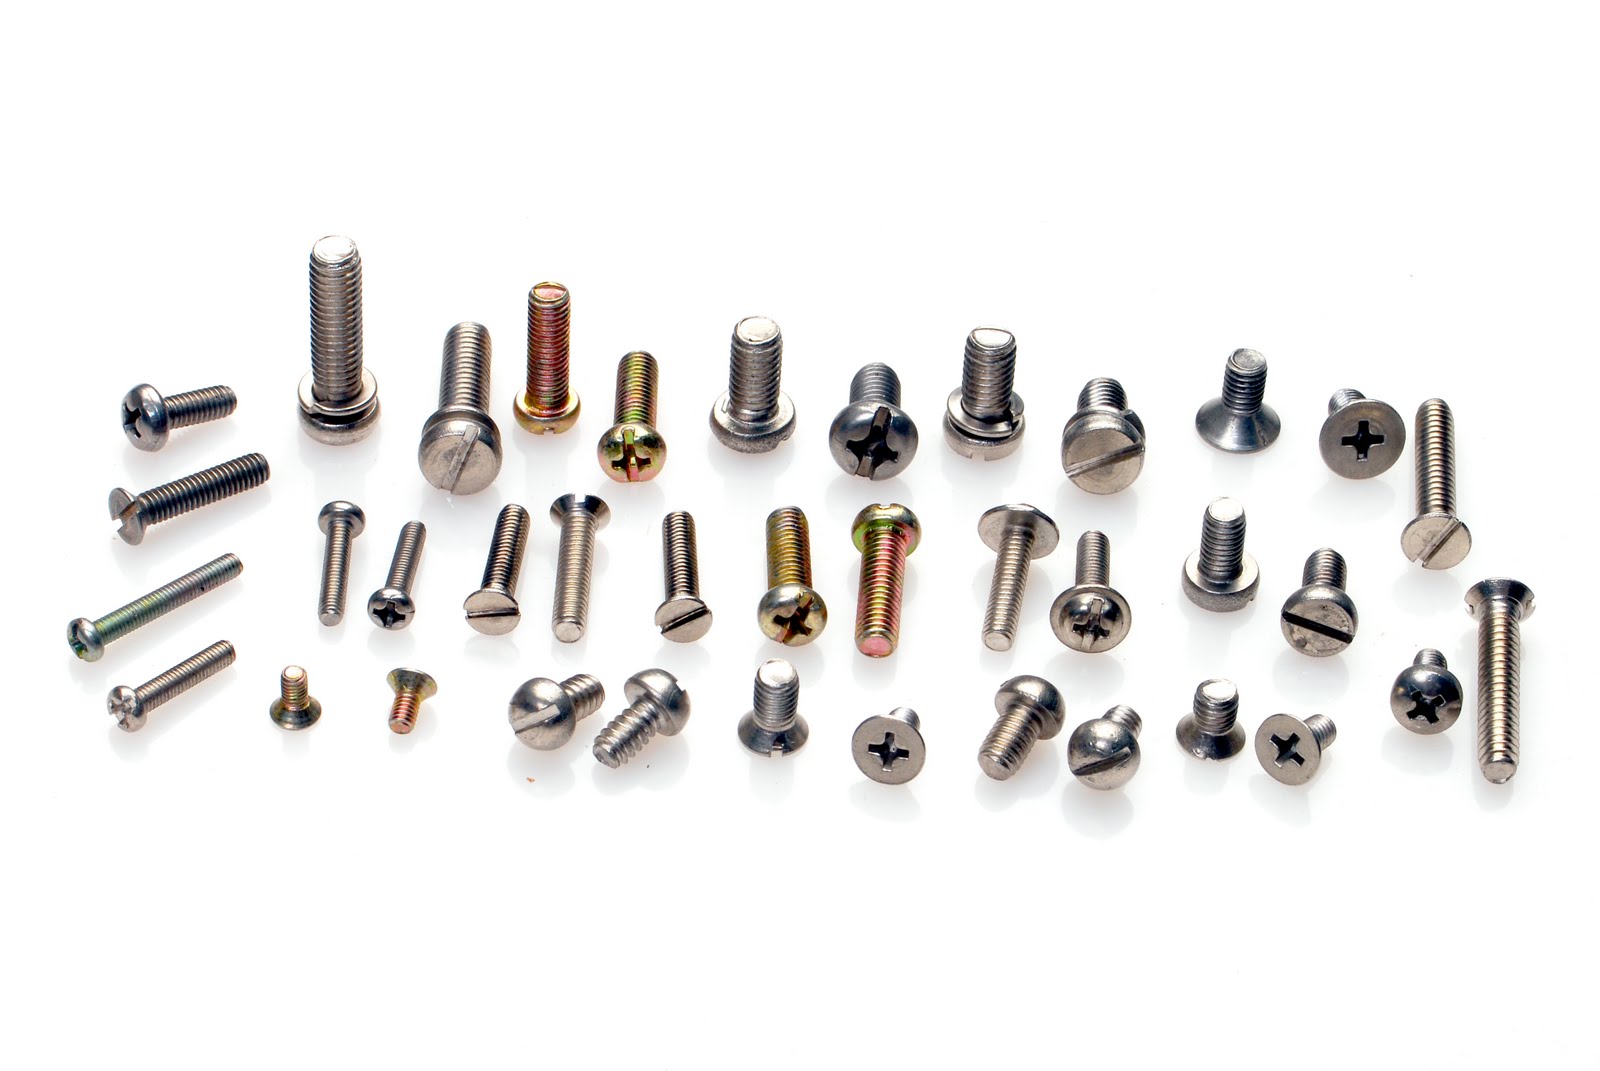 Fasteners and Screws: May 2011